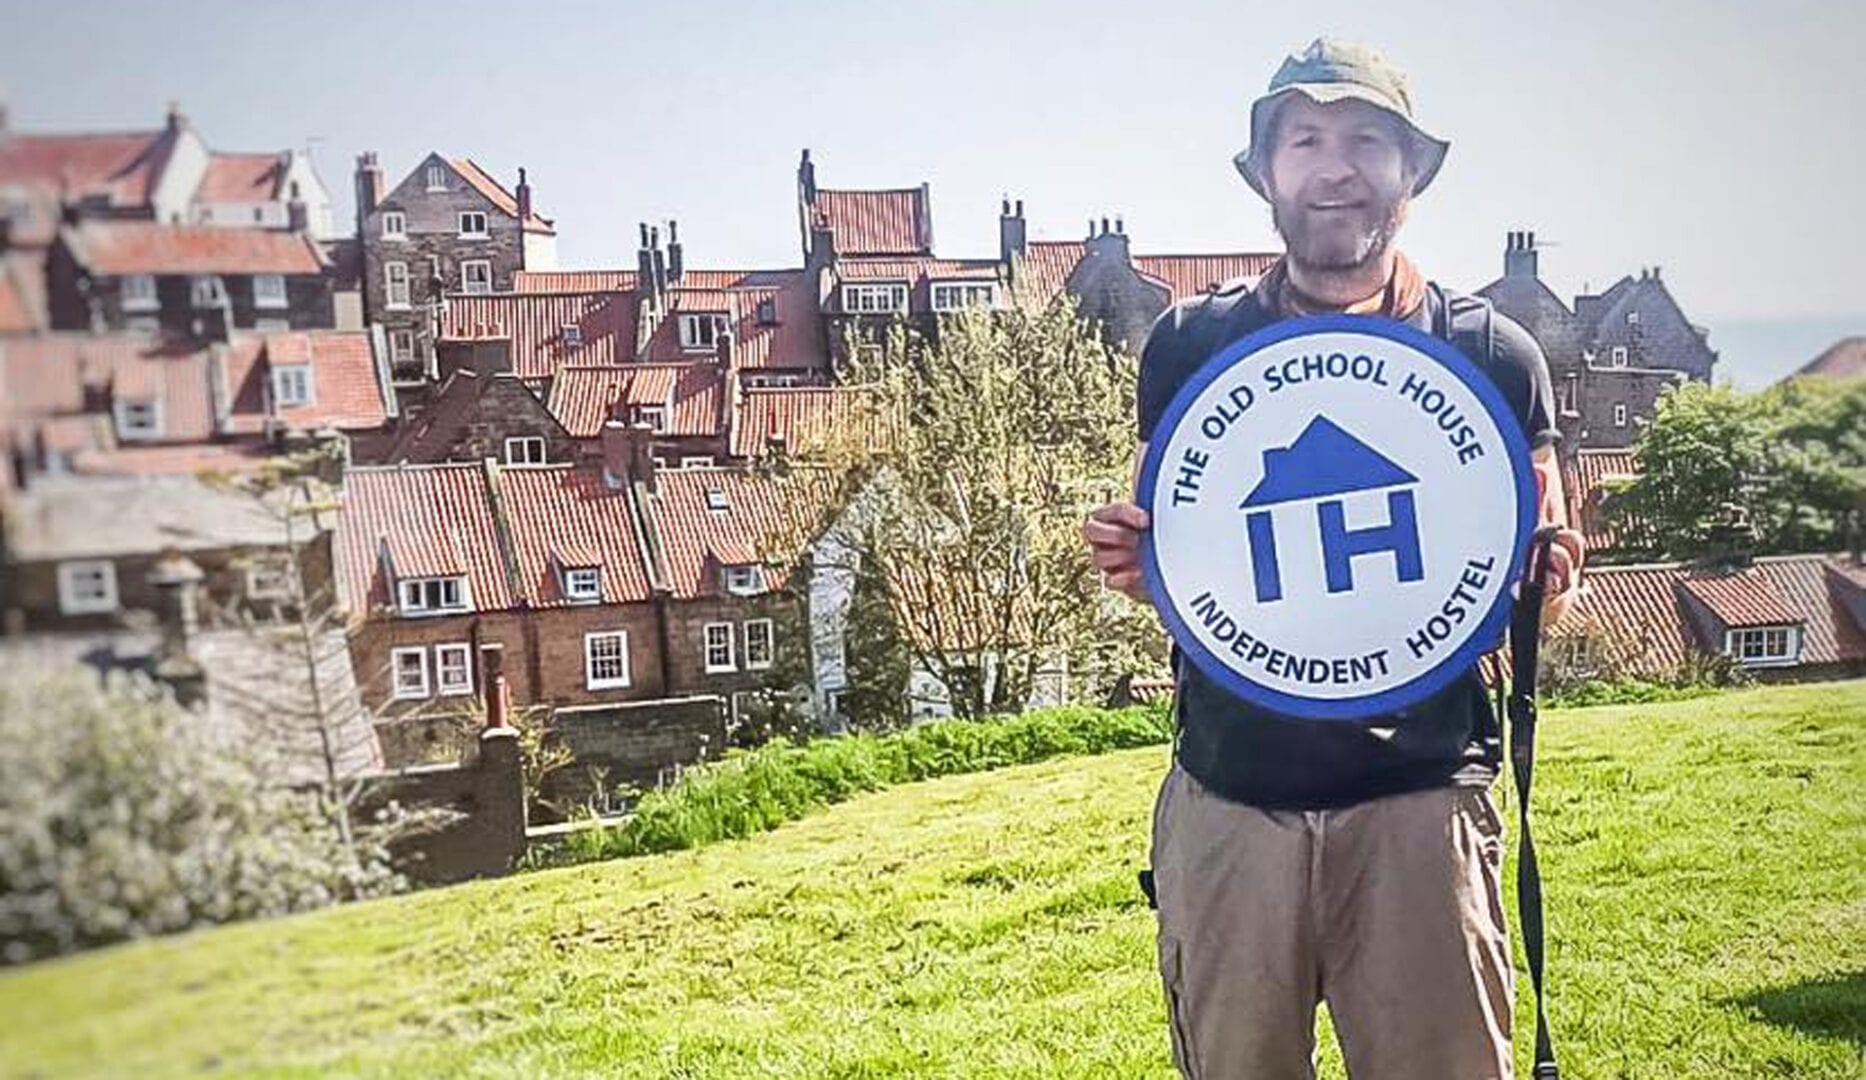 independent hostels sign received by old school lodge robin hoods bay